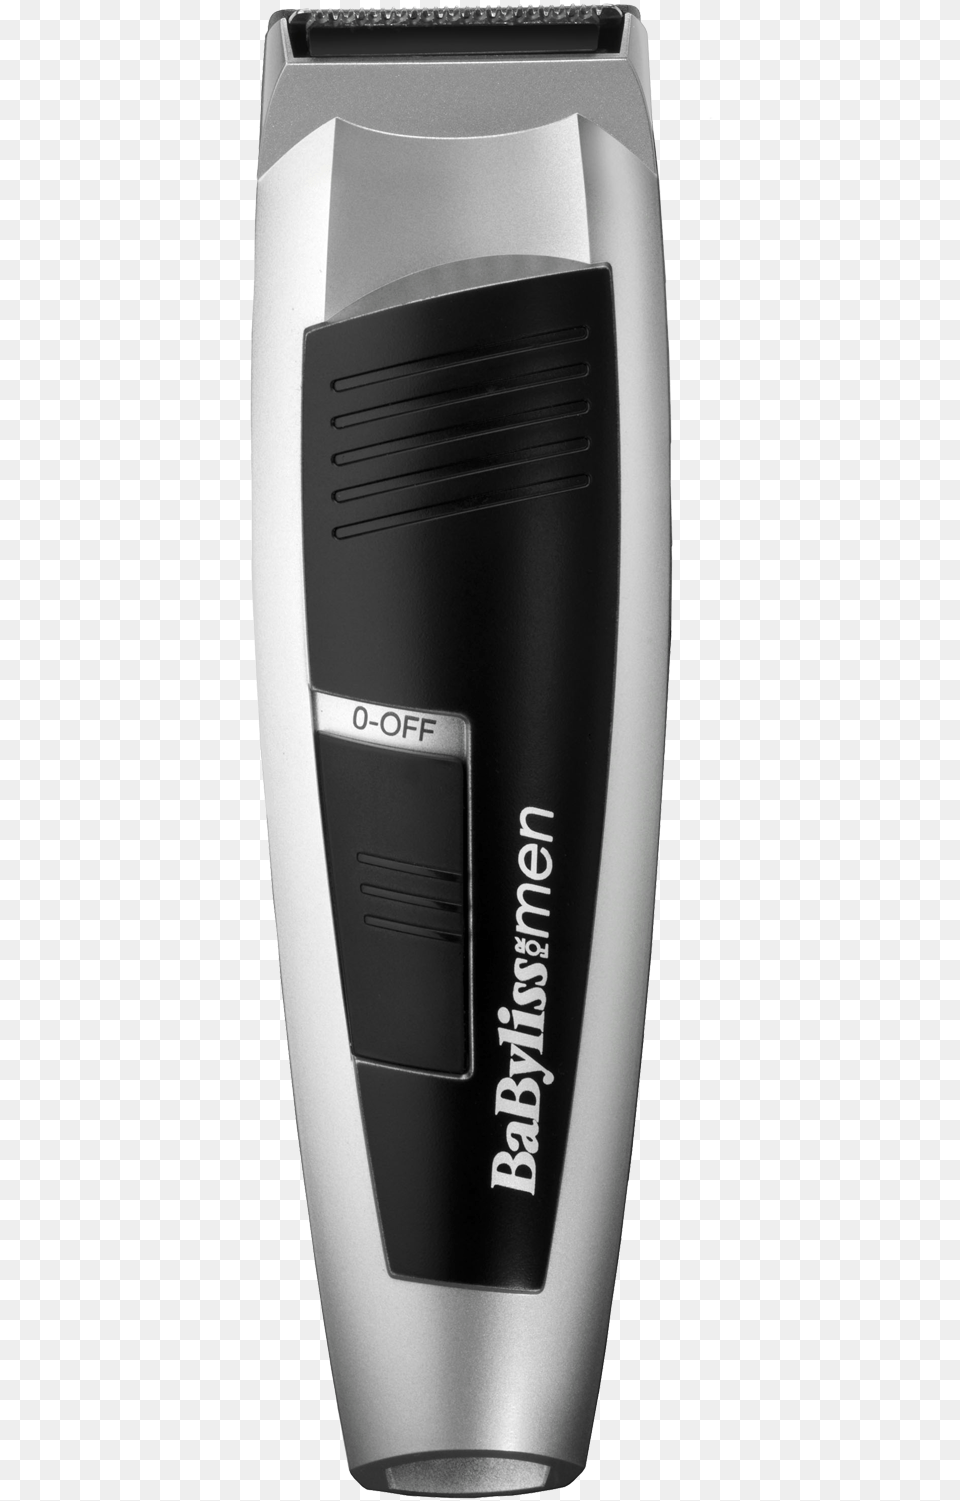 Babyliss For Men 7848u Stubble Trimmer In Silver Amp Babyliss, Electronics, Mobile Phone, Phone, Electrical Device Png Image